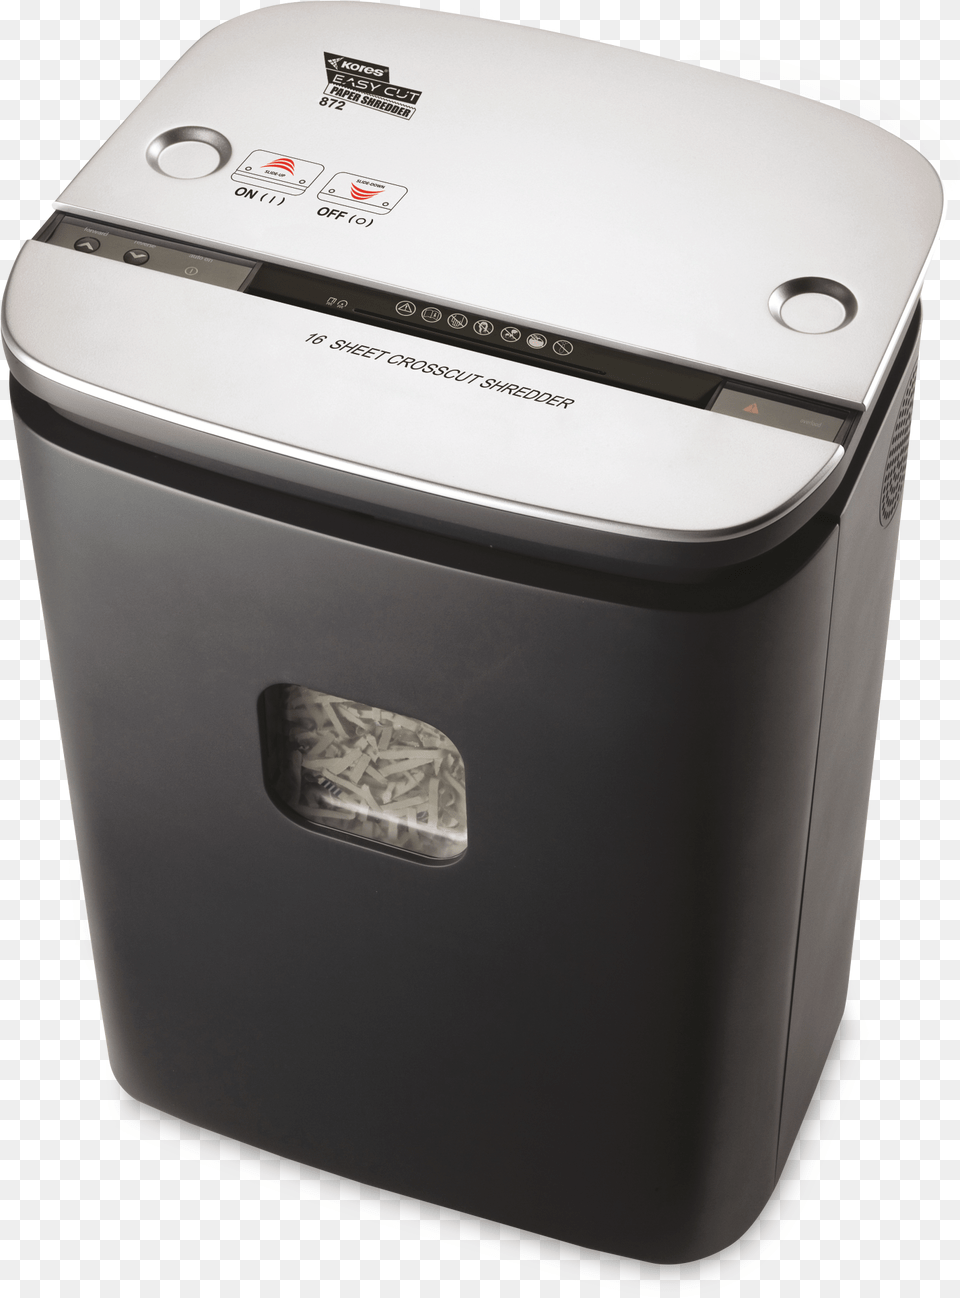 Paper Shredder, Device, Appliance, Electrical Device, Washer Png Image